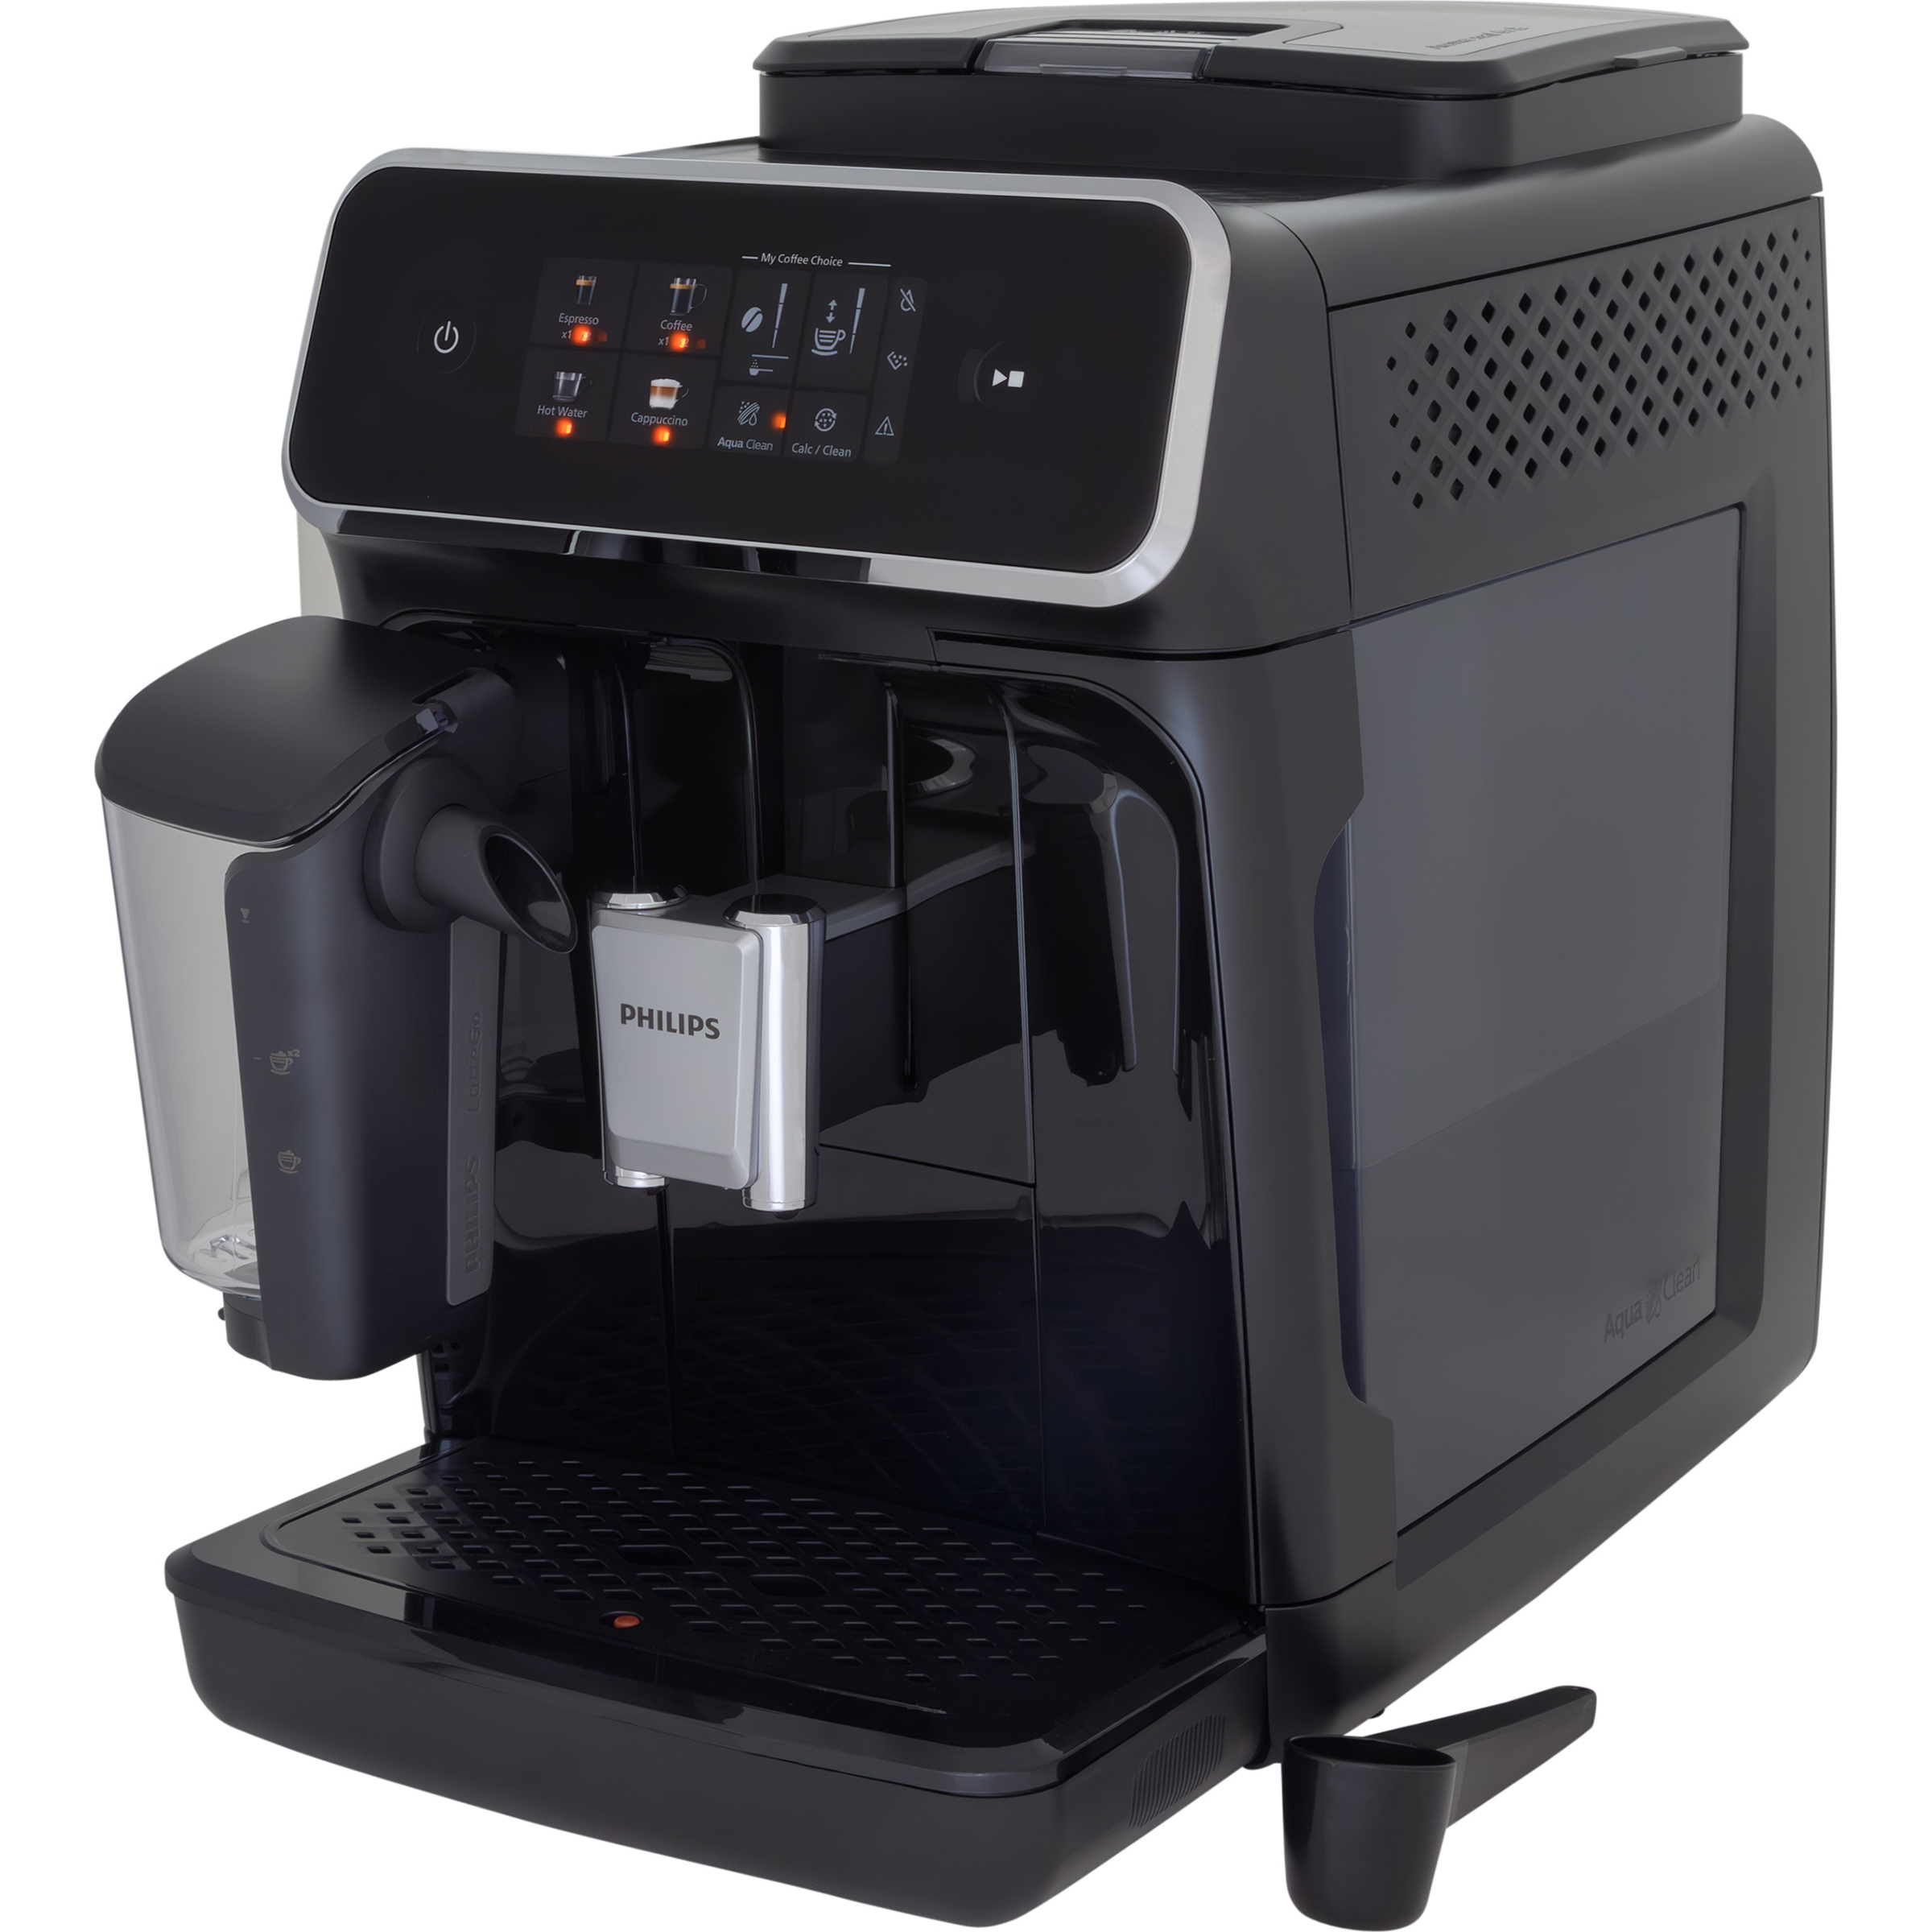 https://imtc.qccdn.fr/test/cafetiere-a-expresso-avec-broyeur-a-grains/zoom/phillips-2300-serie-lattego-ep2331-10_001.jpg